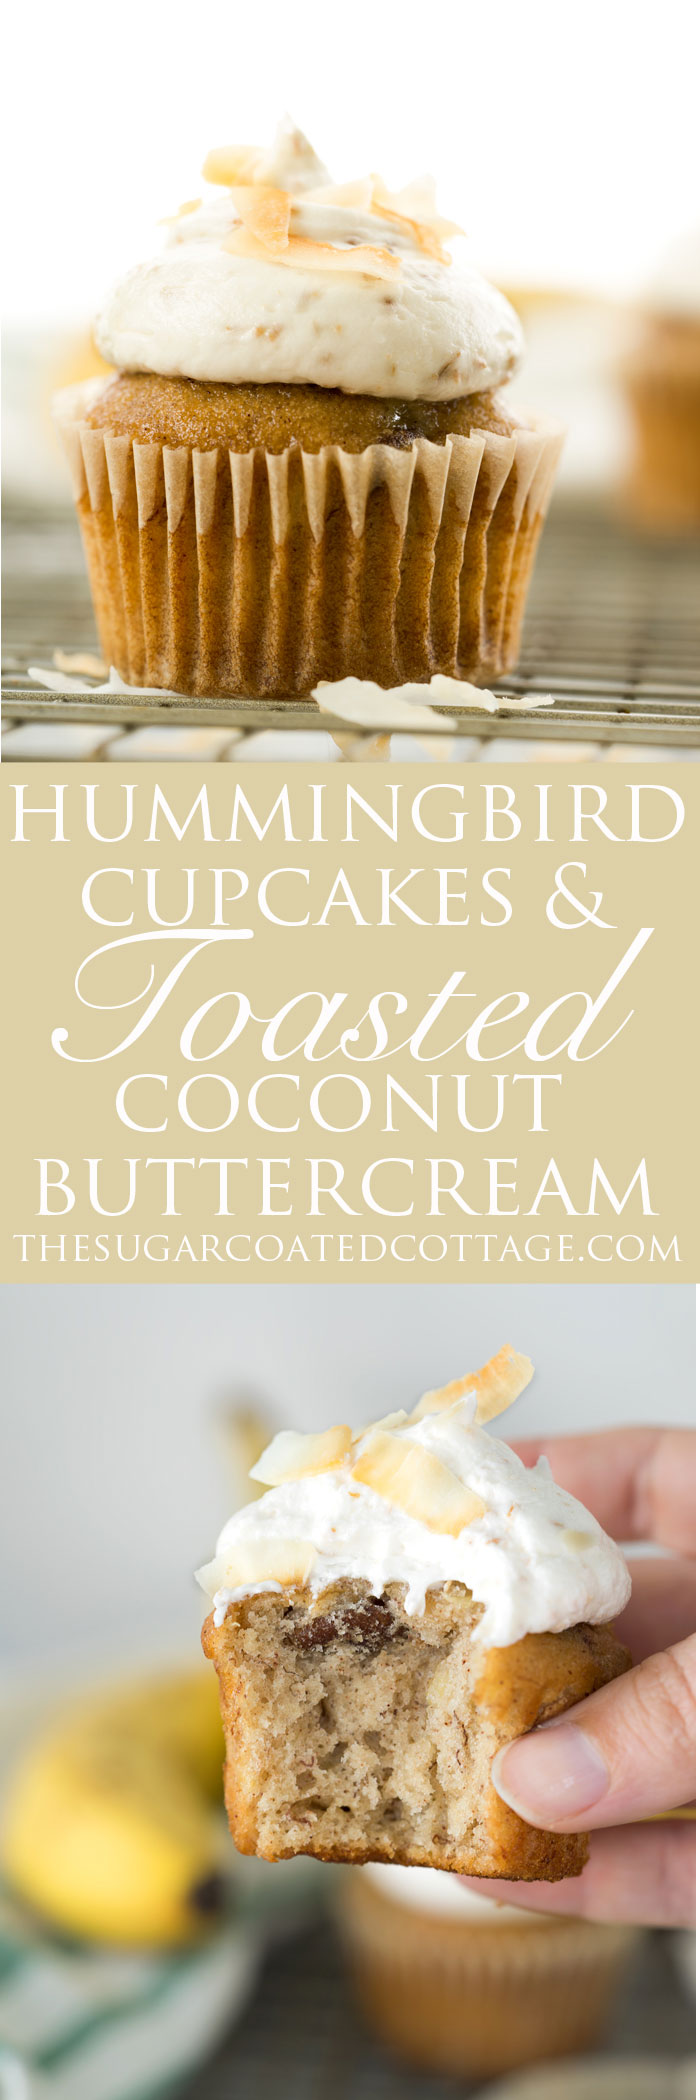 Hummingbird Cupcakes & Toasted Coconut Buttercream. A southern classic topped with a swirl of smooth and creamy toasted coconut buttercream. | thesugarcoatedcottage.com #banana #cupcake #hummingbird